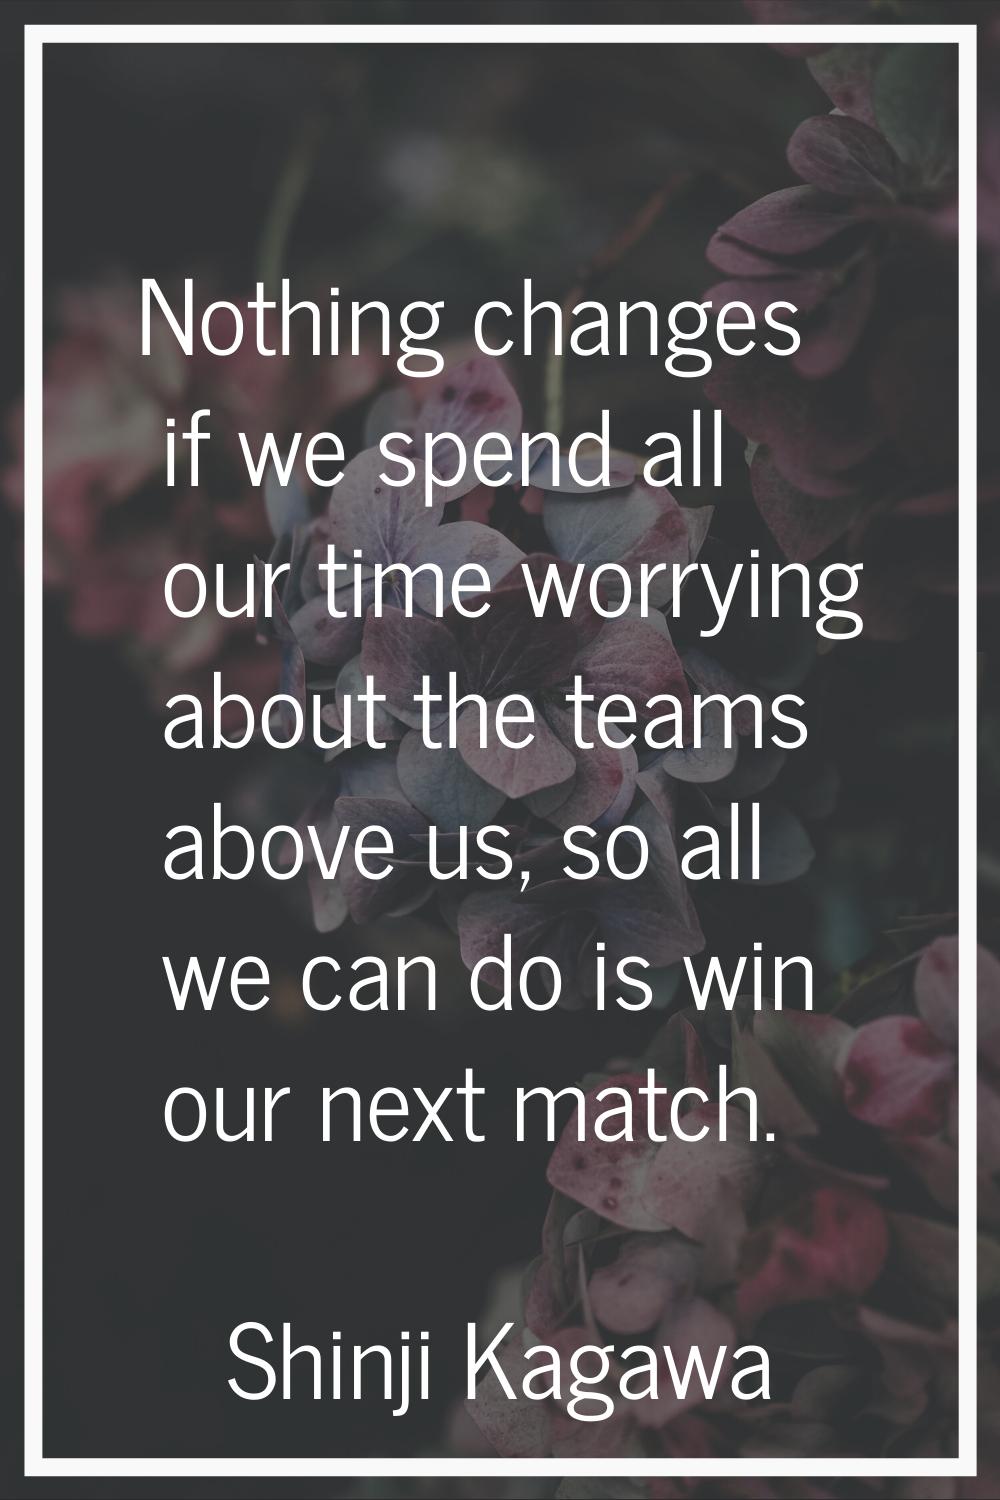 Nothing changes if we spend all our time worrying about the teams above us, so all we can do is win